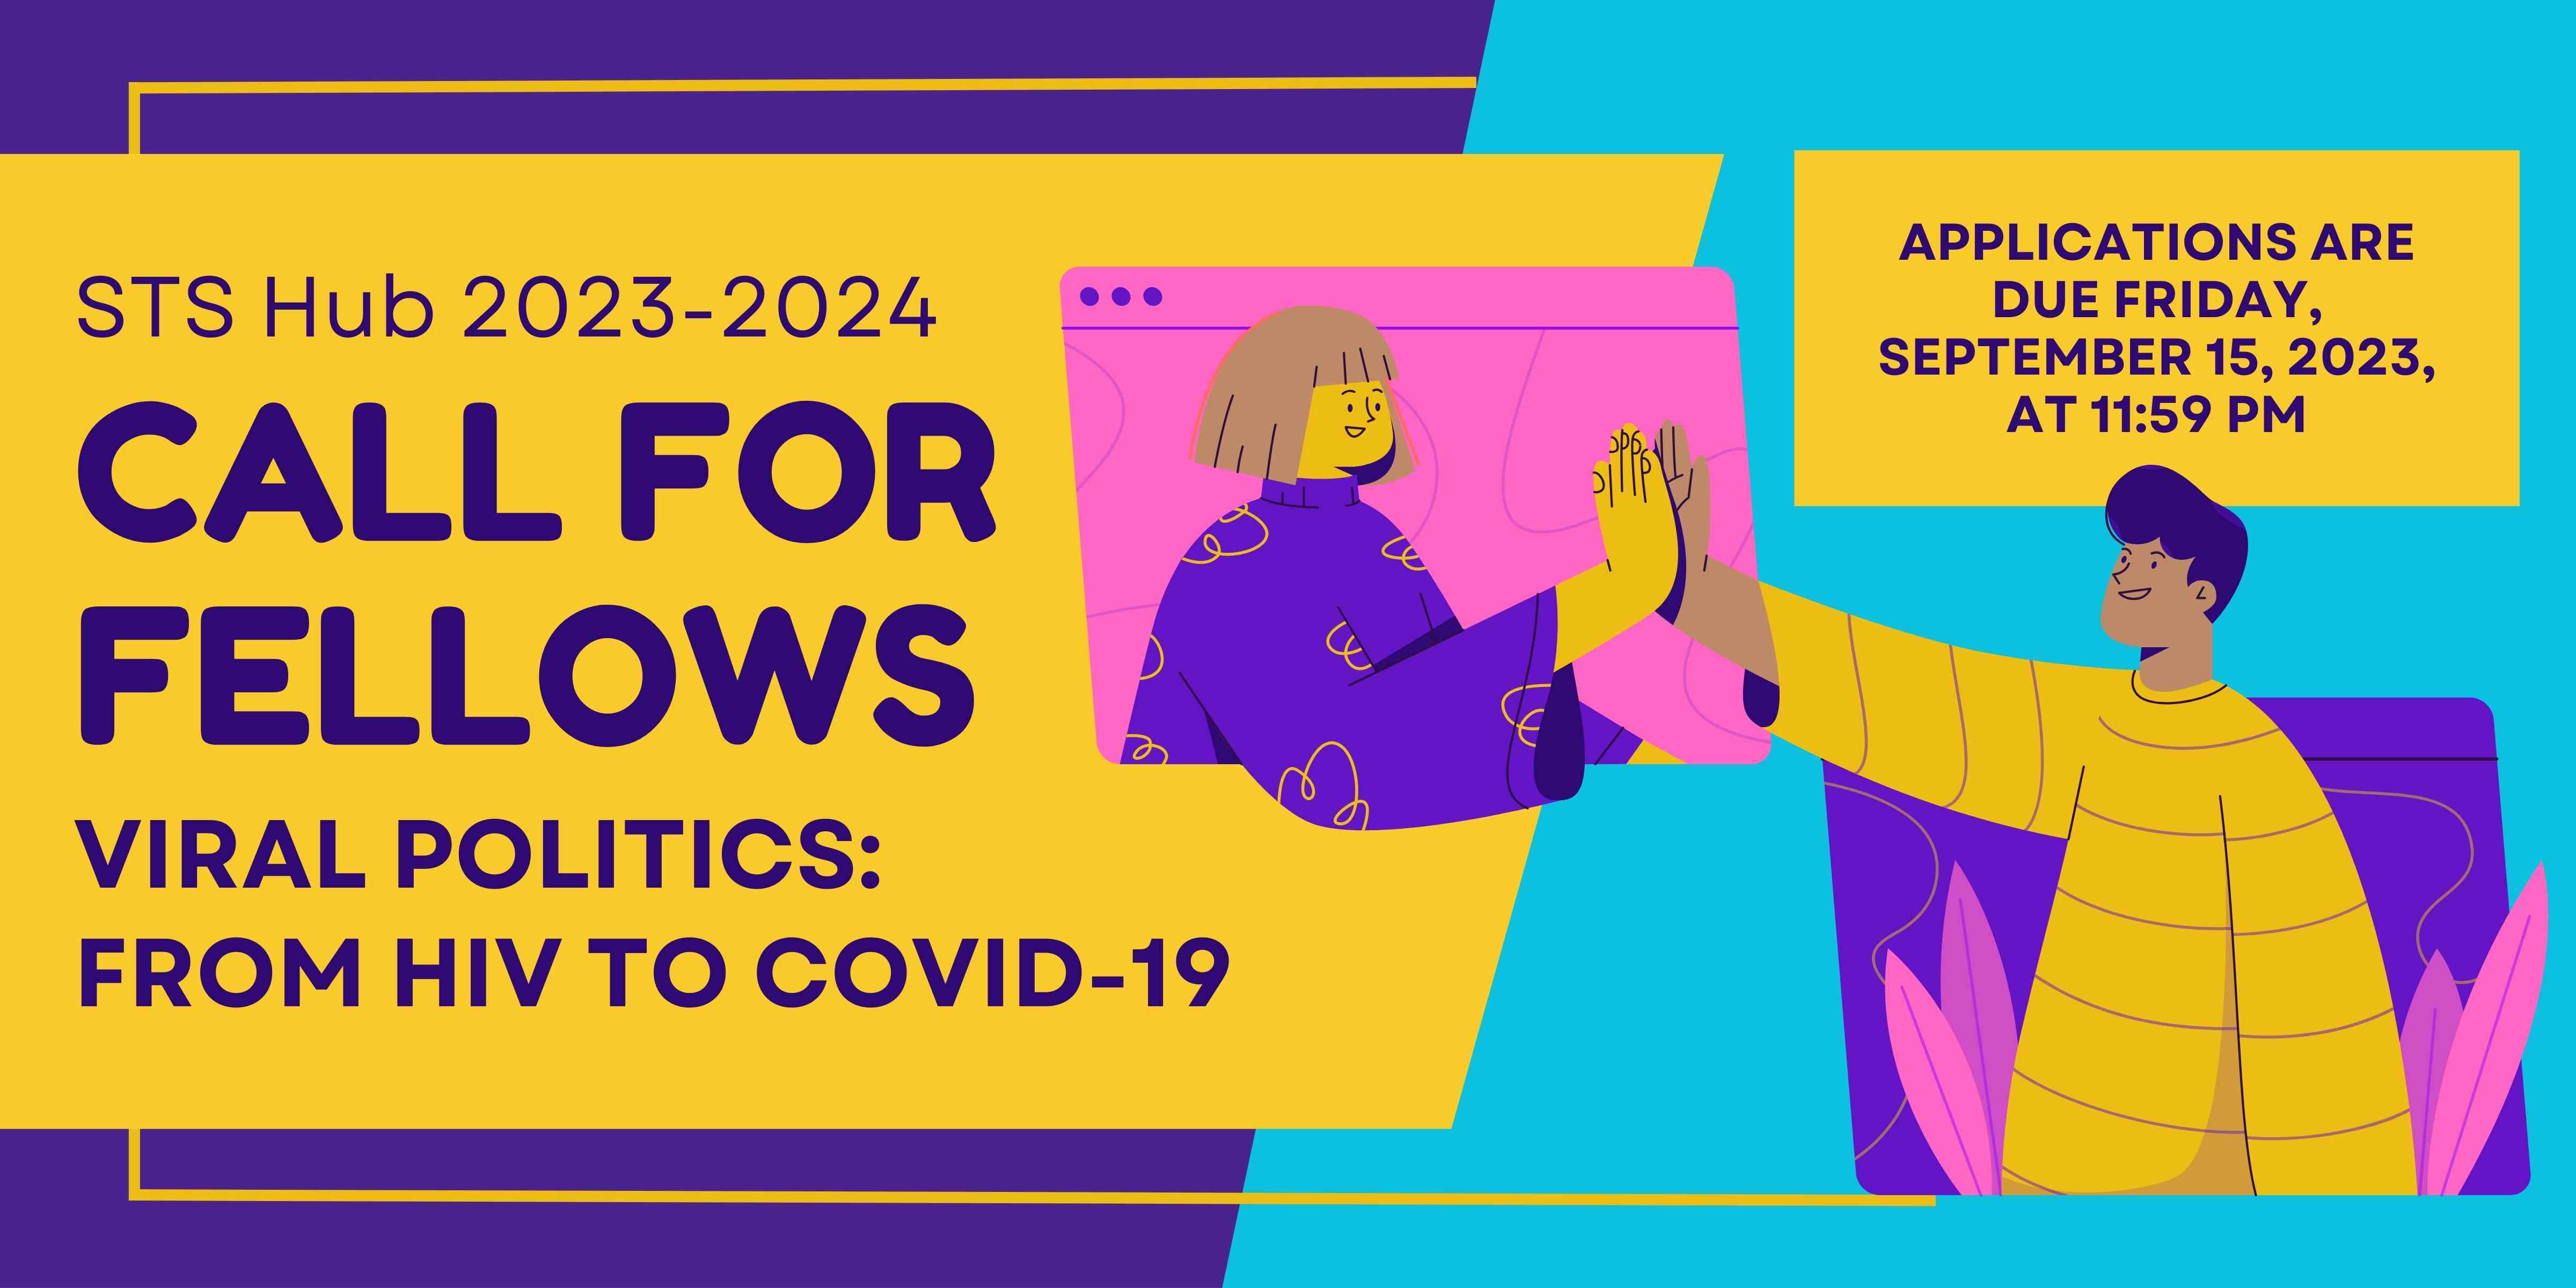 A purple, turquoise, gold, and pink banner that reads, STS Hub Call for Fellows (2023-2024) Viral Politics: From HIV to Covid-19, Applications are due Friday, September 15, 2023, at 11:59 pm. An image shows two people high-fiving from within two screens.